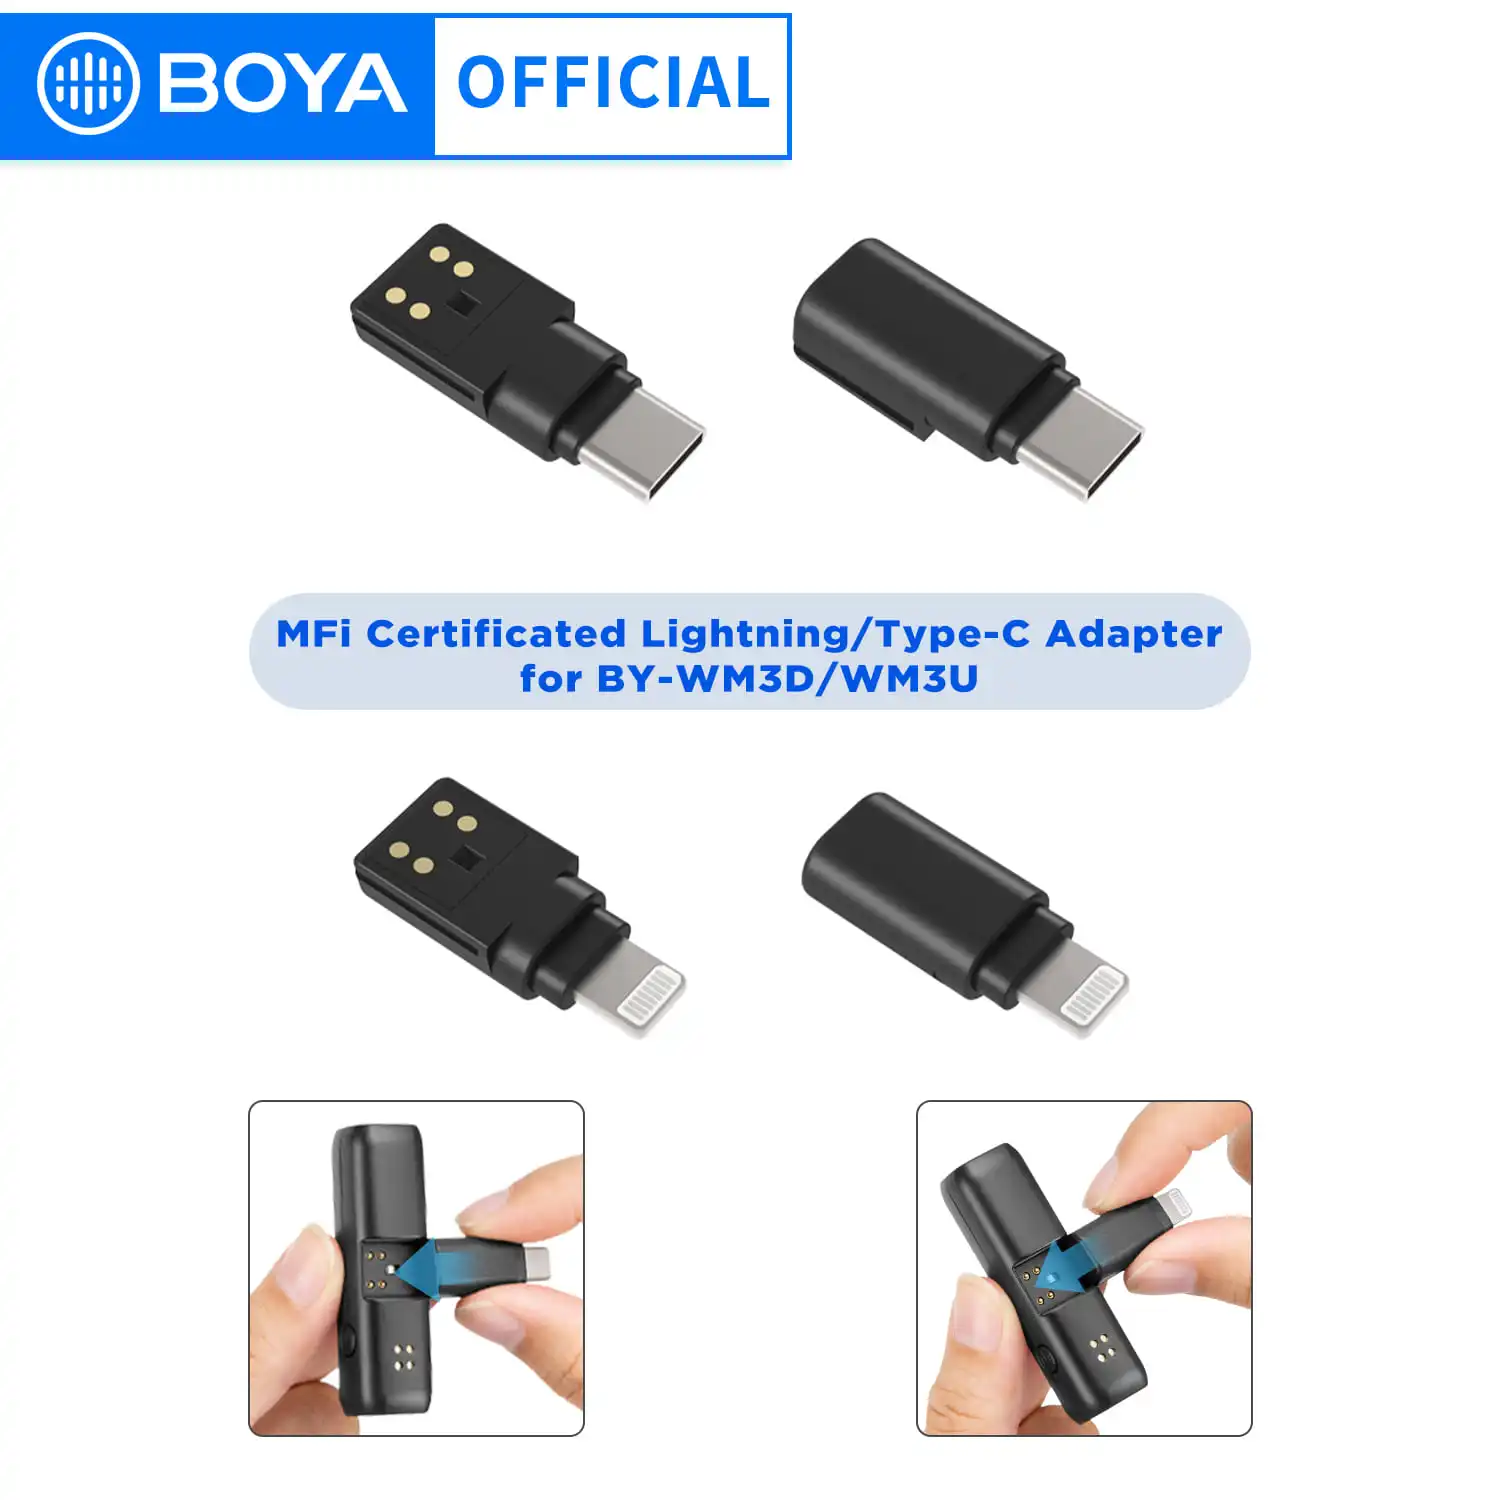 BOYA MFI Certificated Lightning Type-C Adapter for BY-WM3D/WM3U Wireless Microphone iOS Devices Android Smartphone Accessories